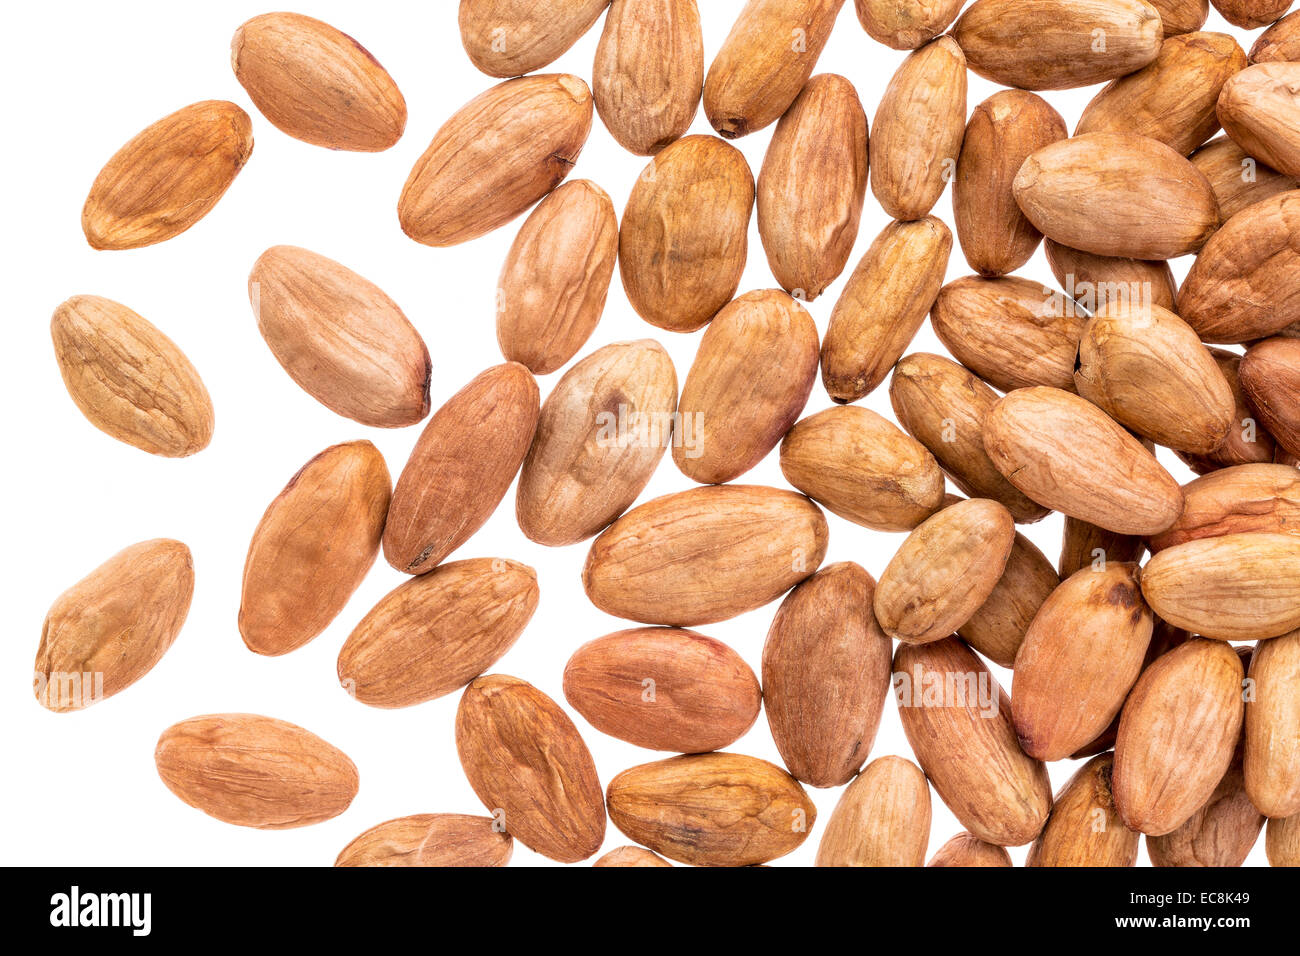 raw cacao beans o in shells against white background Stock Photo